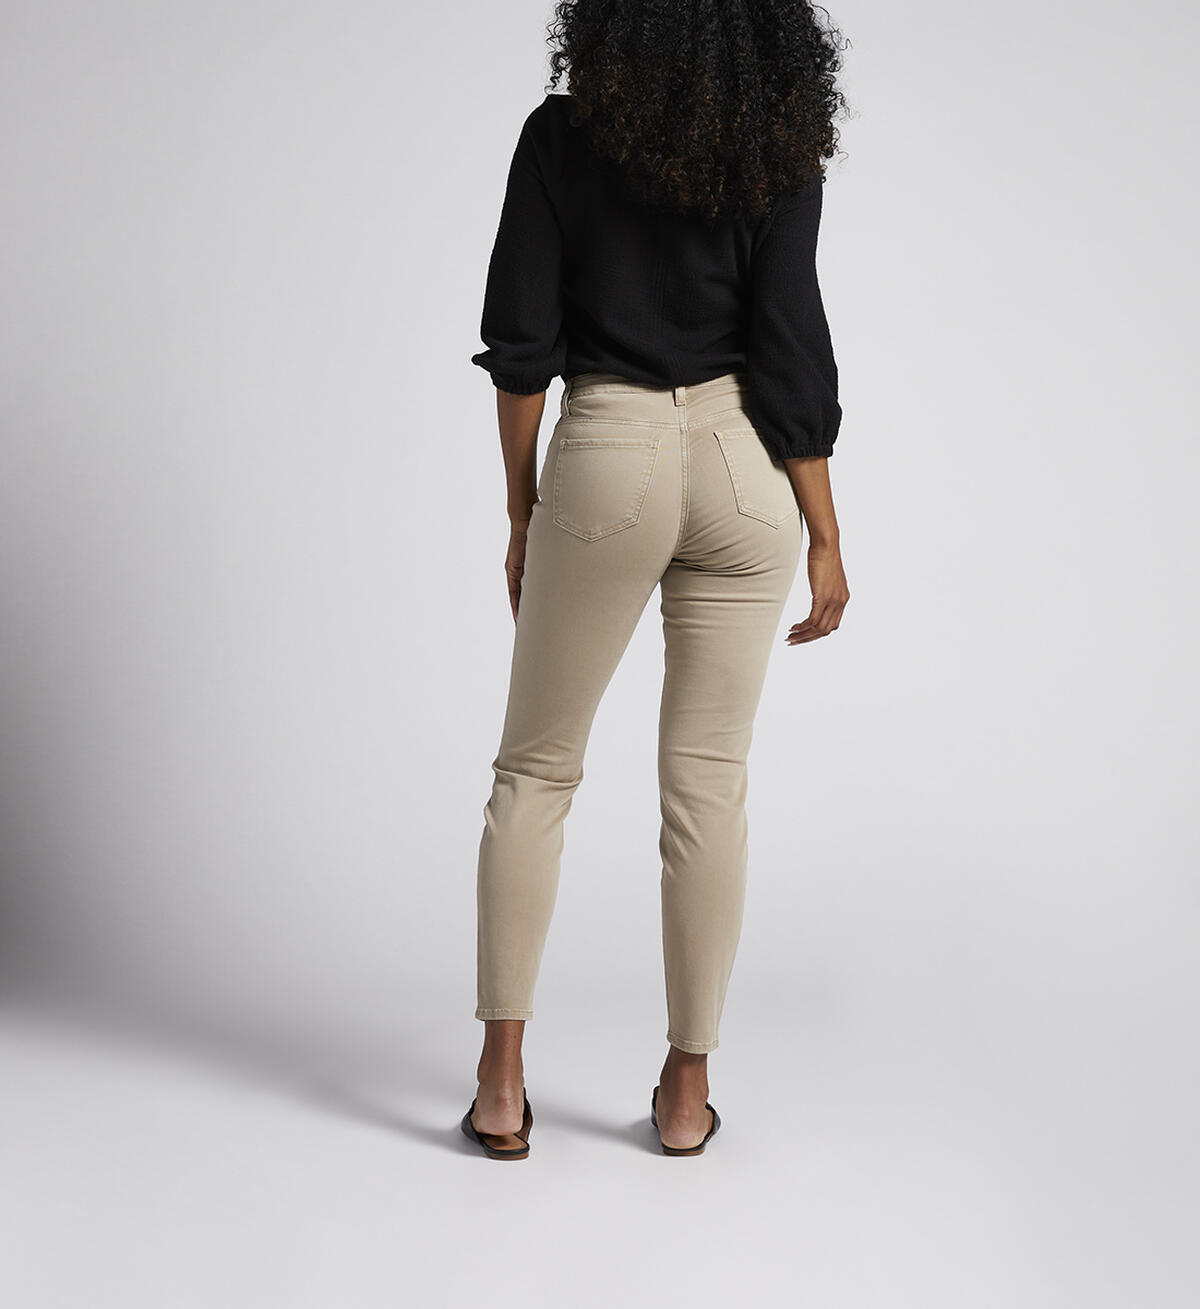 Cecilia Mid Rise Skinny Pants, Taupe, hi-res image number 1